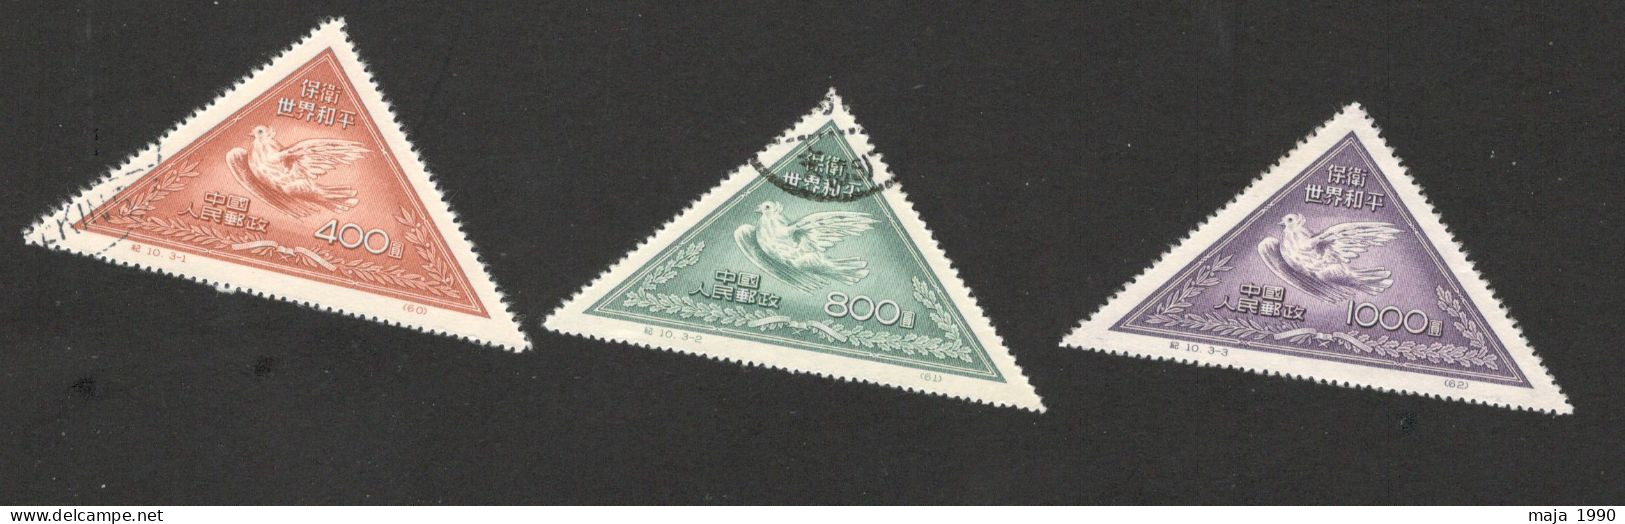 CHINA - USED/MNG SET- PEACE CAMPAIGN - 1951. - Gebraucht